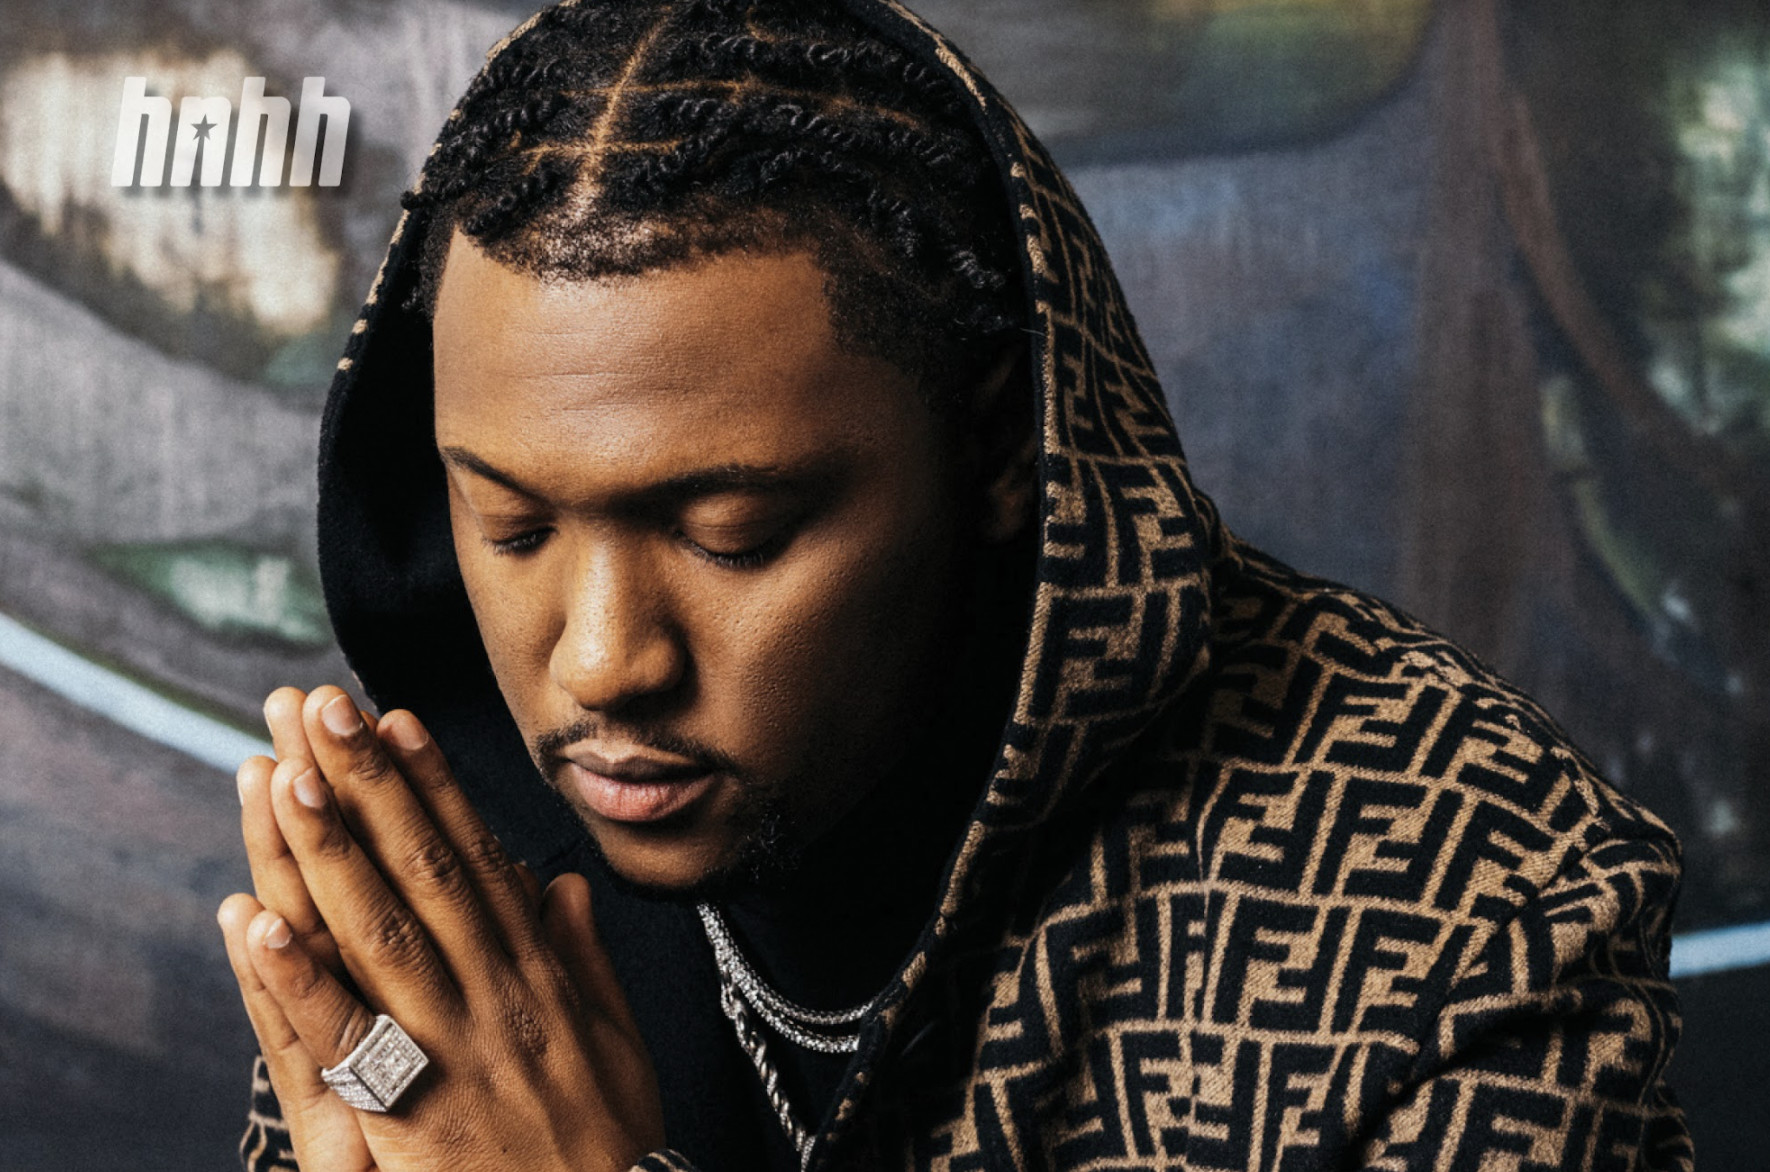 Hit-Boy Reflects On Grammy Noms, Says It’s Not About The Numbers: “All That Can Be Finessed”